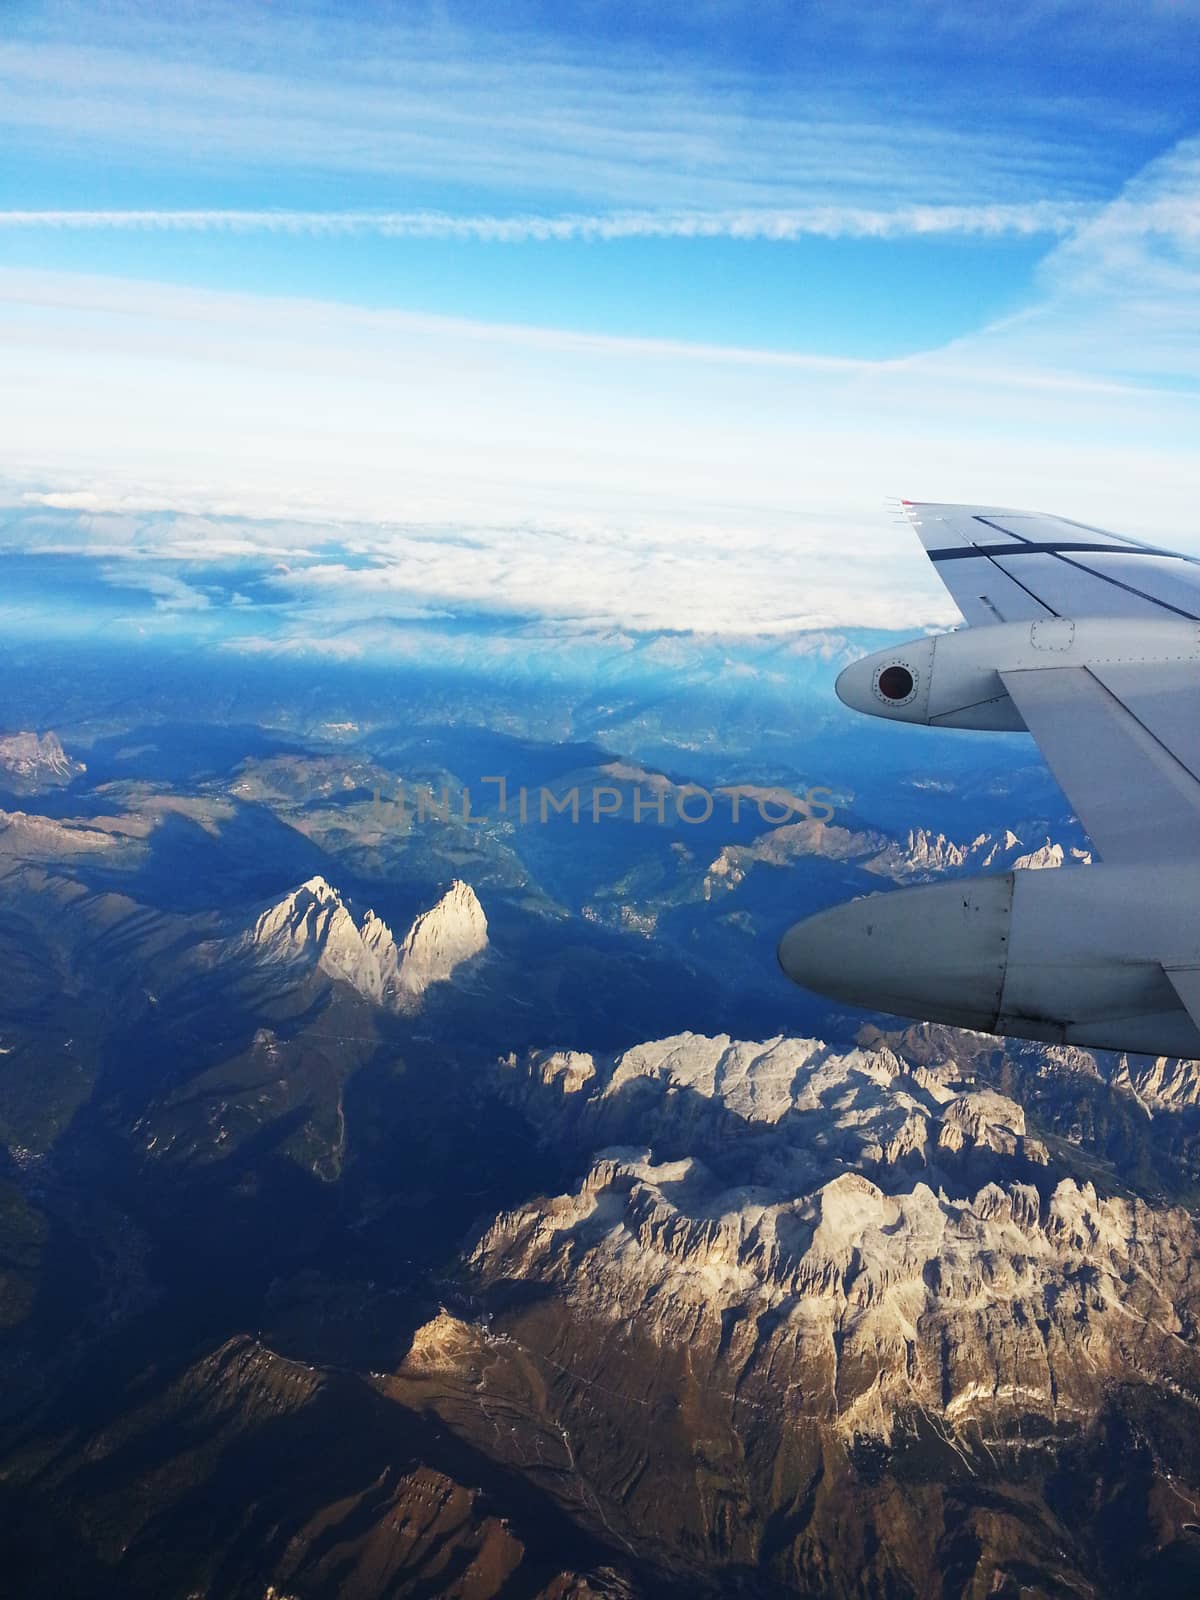 Alps mountain range view from airplane by prowpat